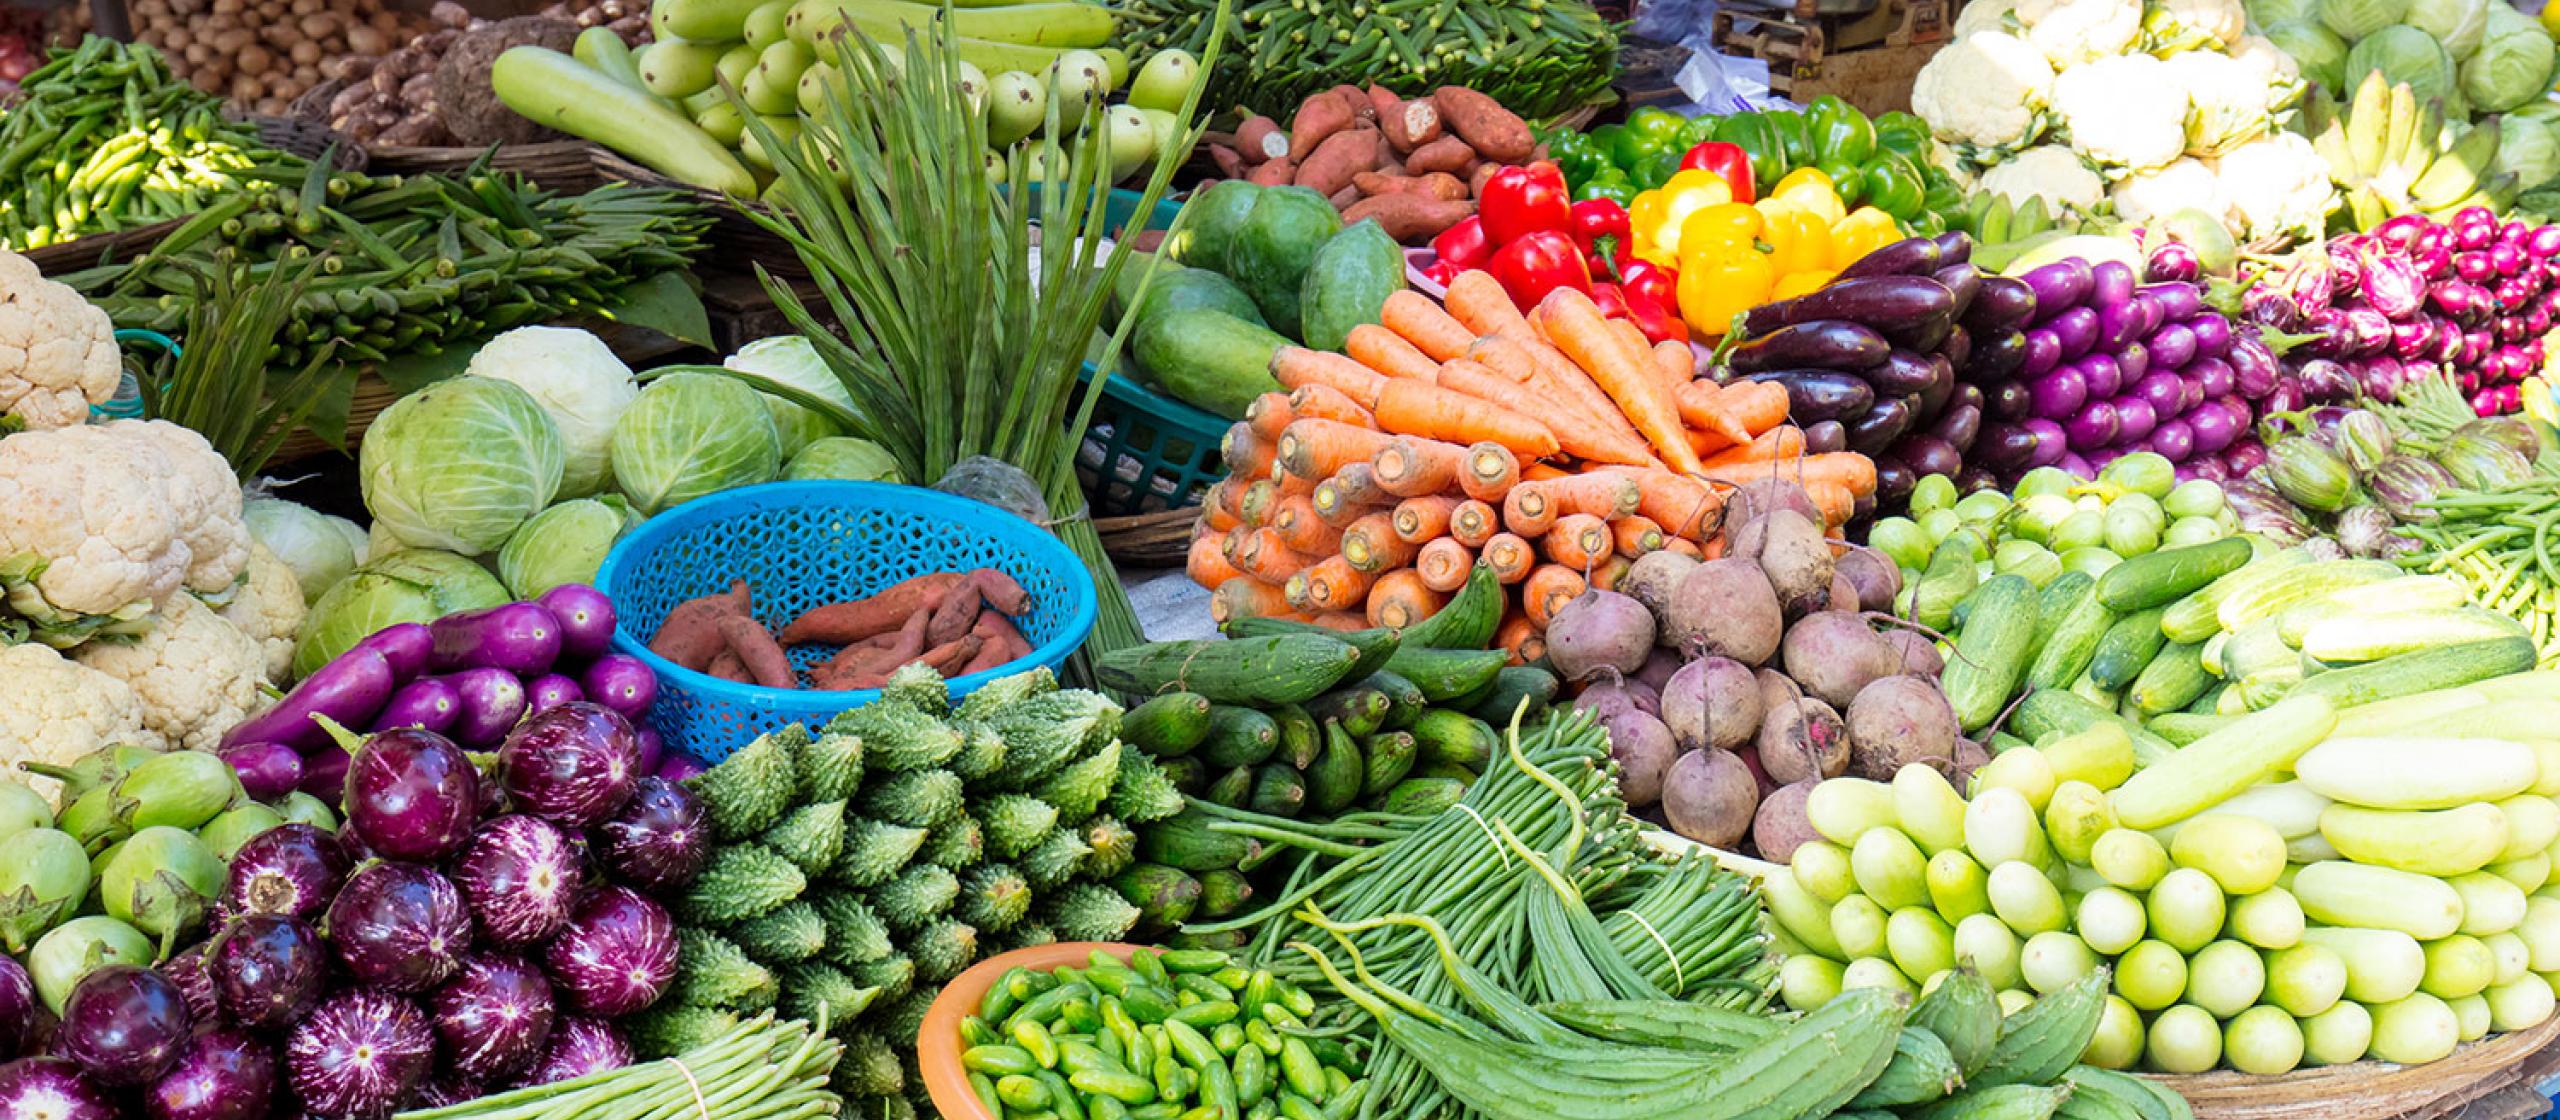 A variety of vegetables displayed at a market